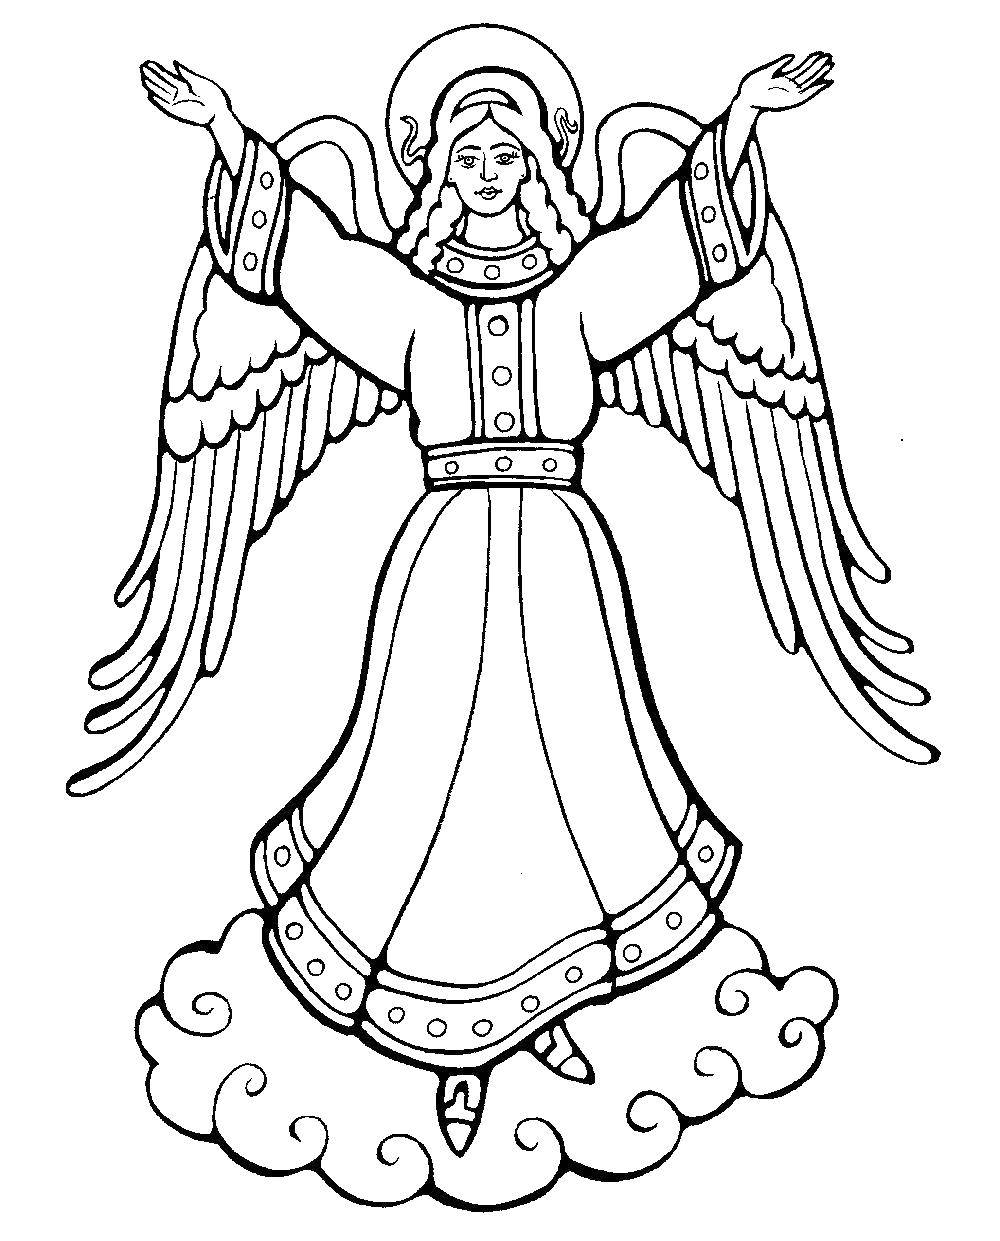 Coloring Sweet angel in the sky. Category coloring Easter. Tags:  Easter, Angel.